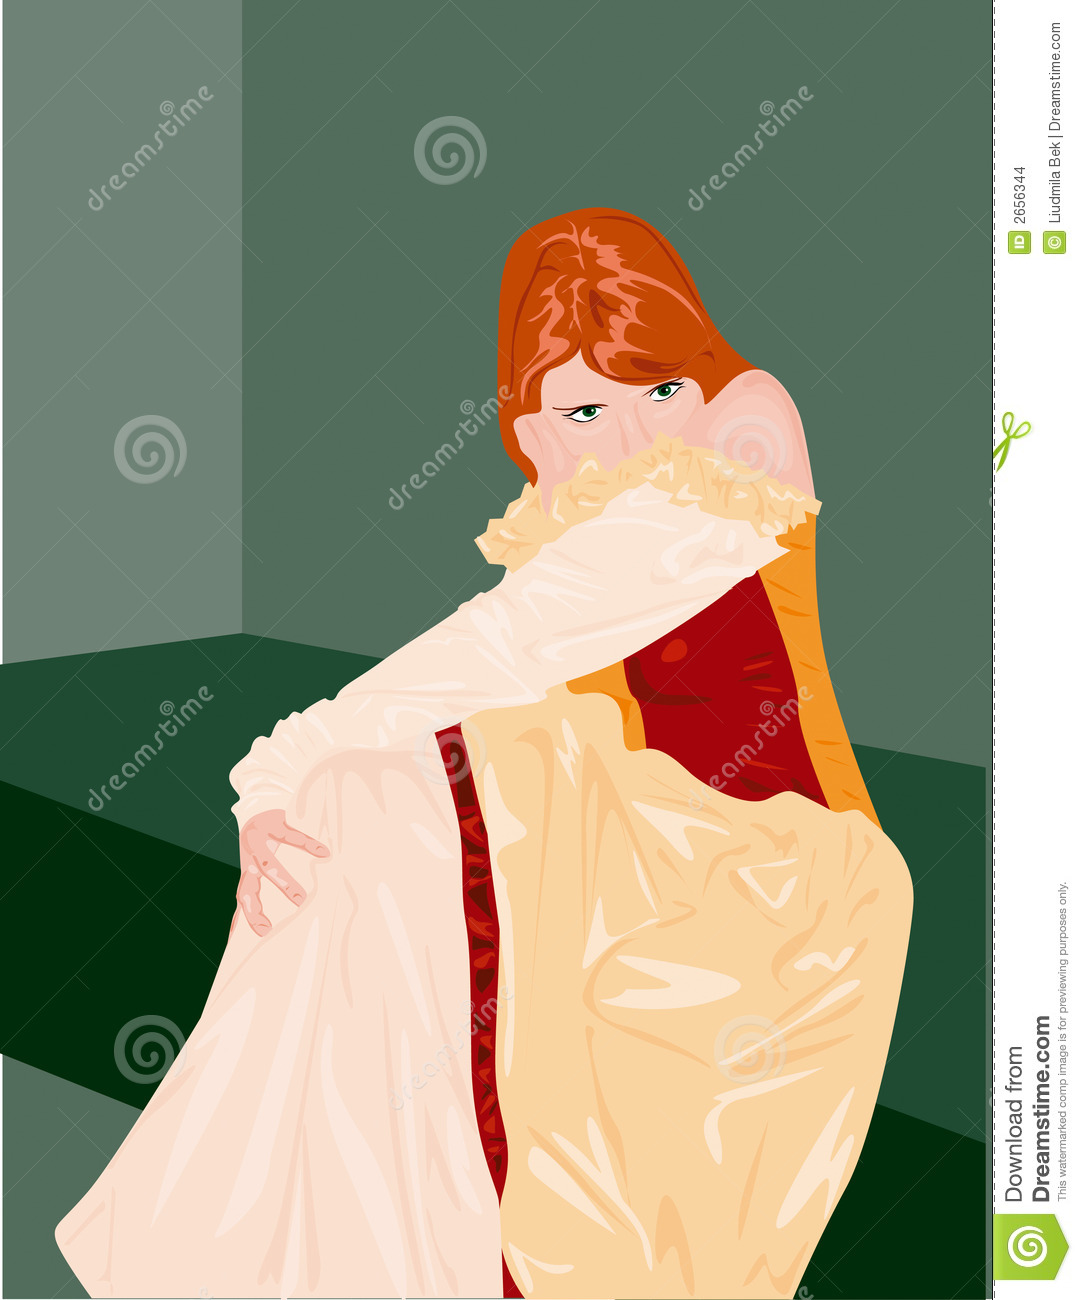 Cartoon Illustration Of Shy Princess With Red Hair Sat In Room